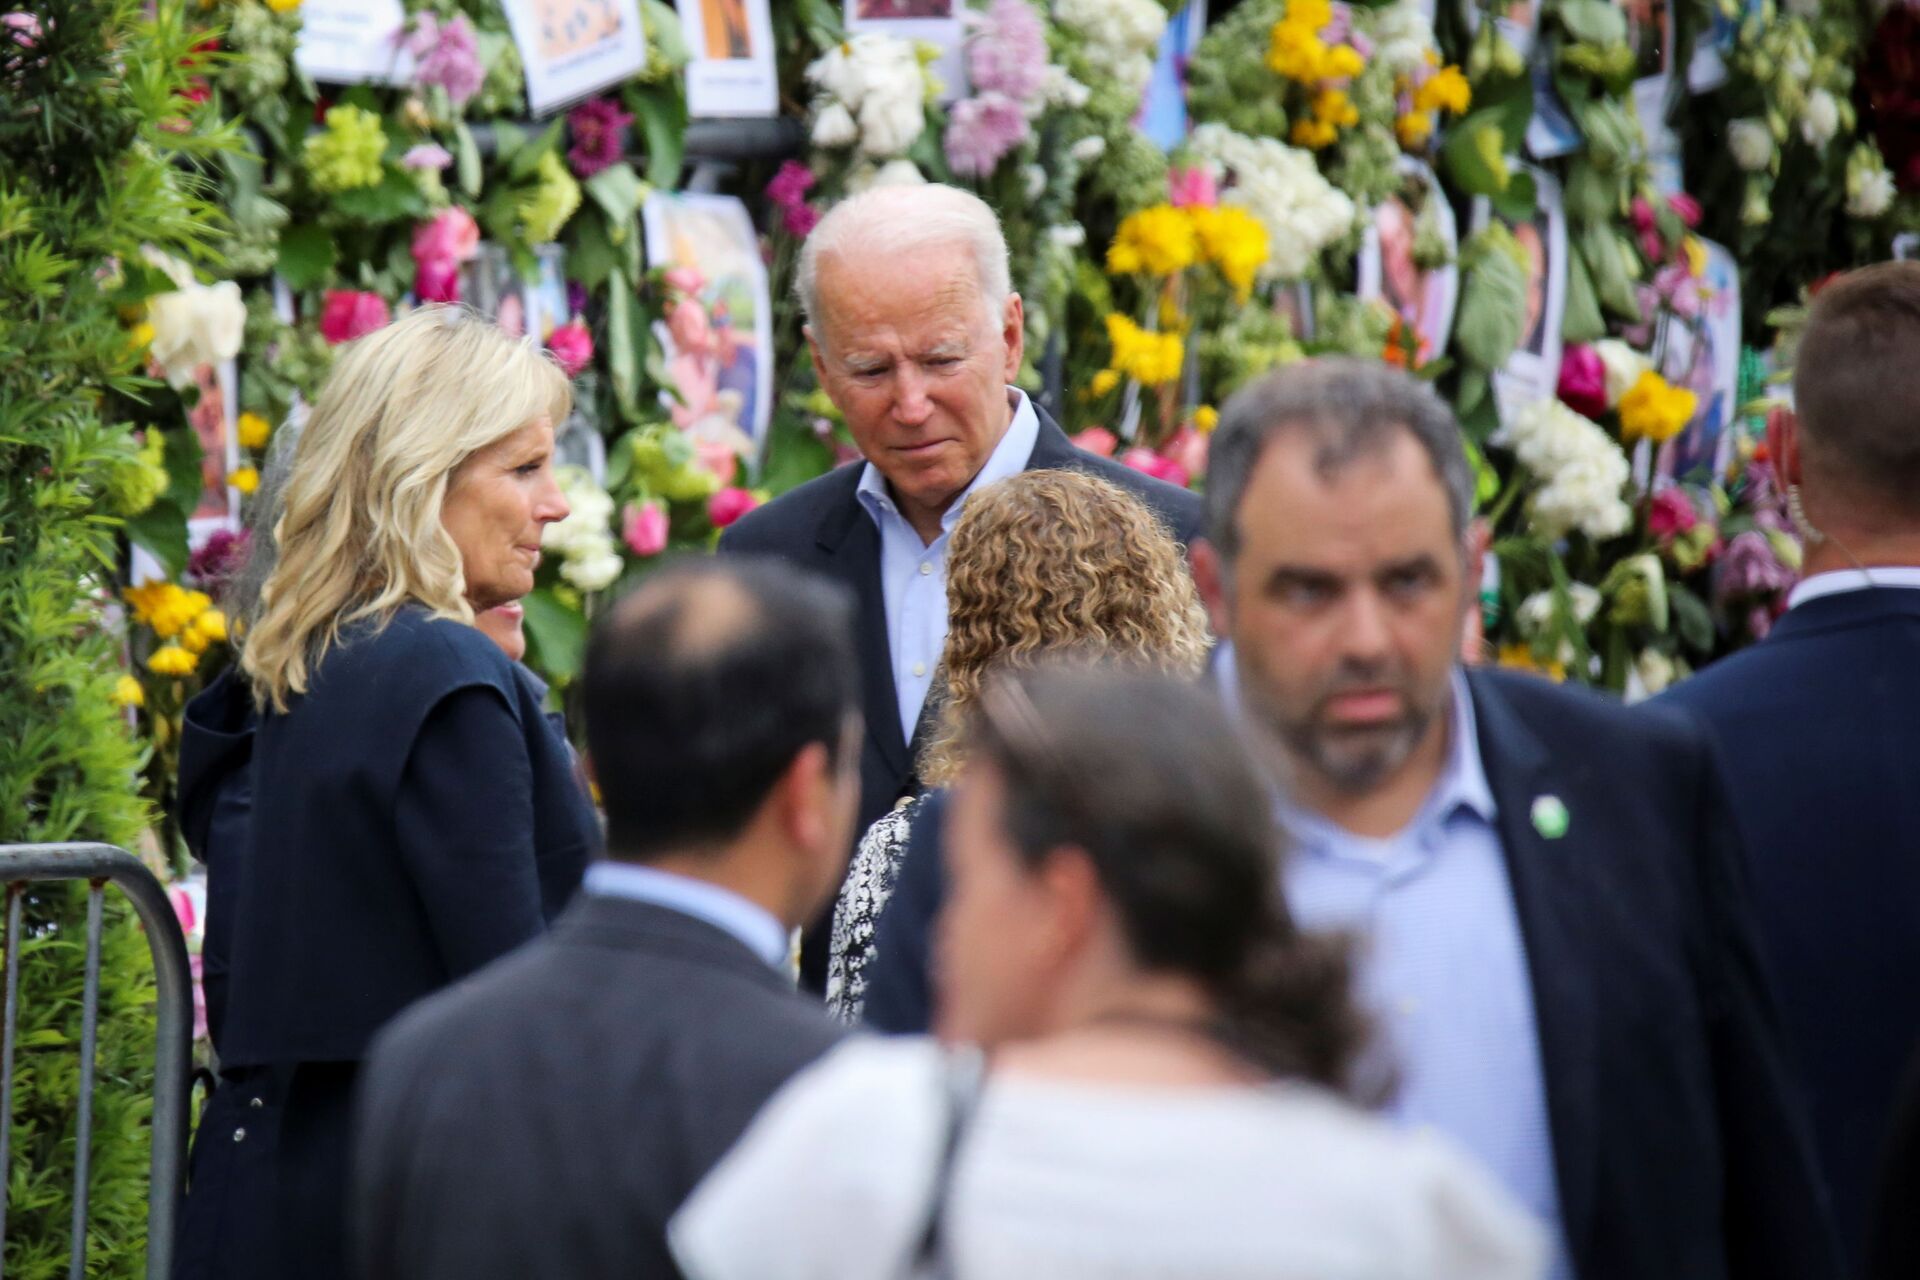 U.S. President Joe Biden and first lady Jill Biden visit a at a memorial site created by neighbours close to the site of a partially collapsed residential building, in Surfside, Florida, U.S. July 1, 2021 - Sputnik International, 1920, 07.09.2021